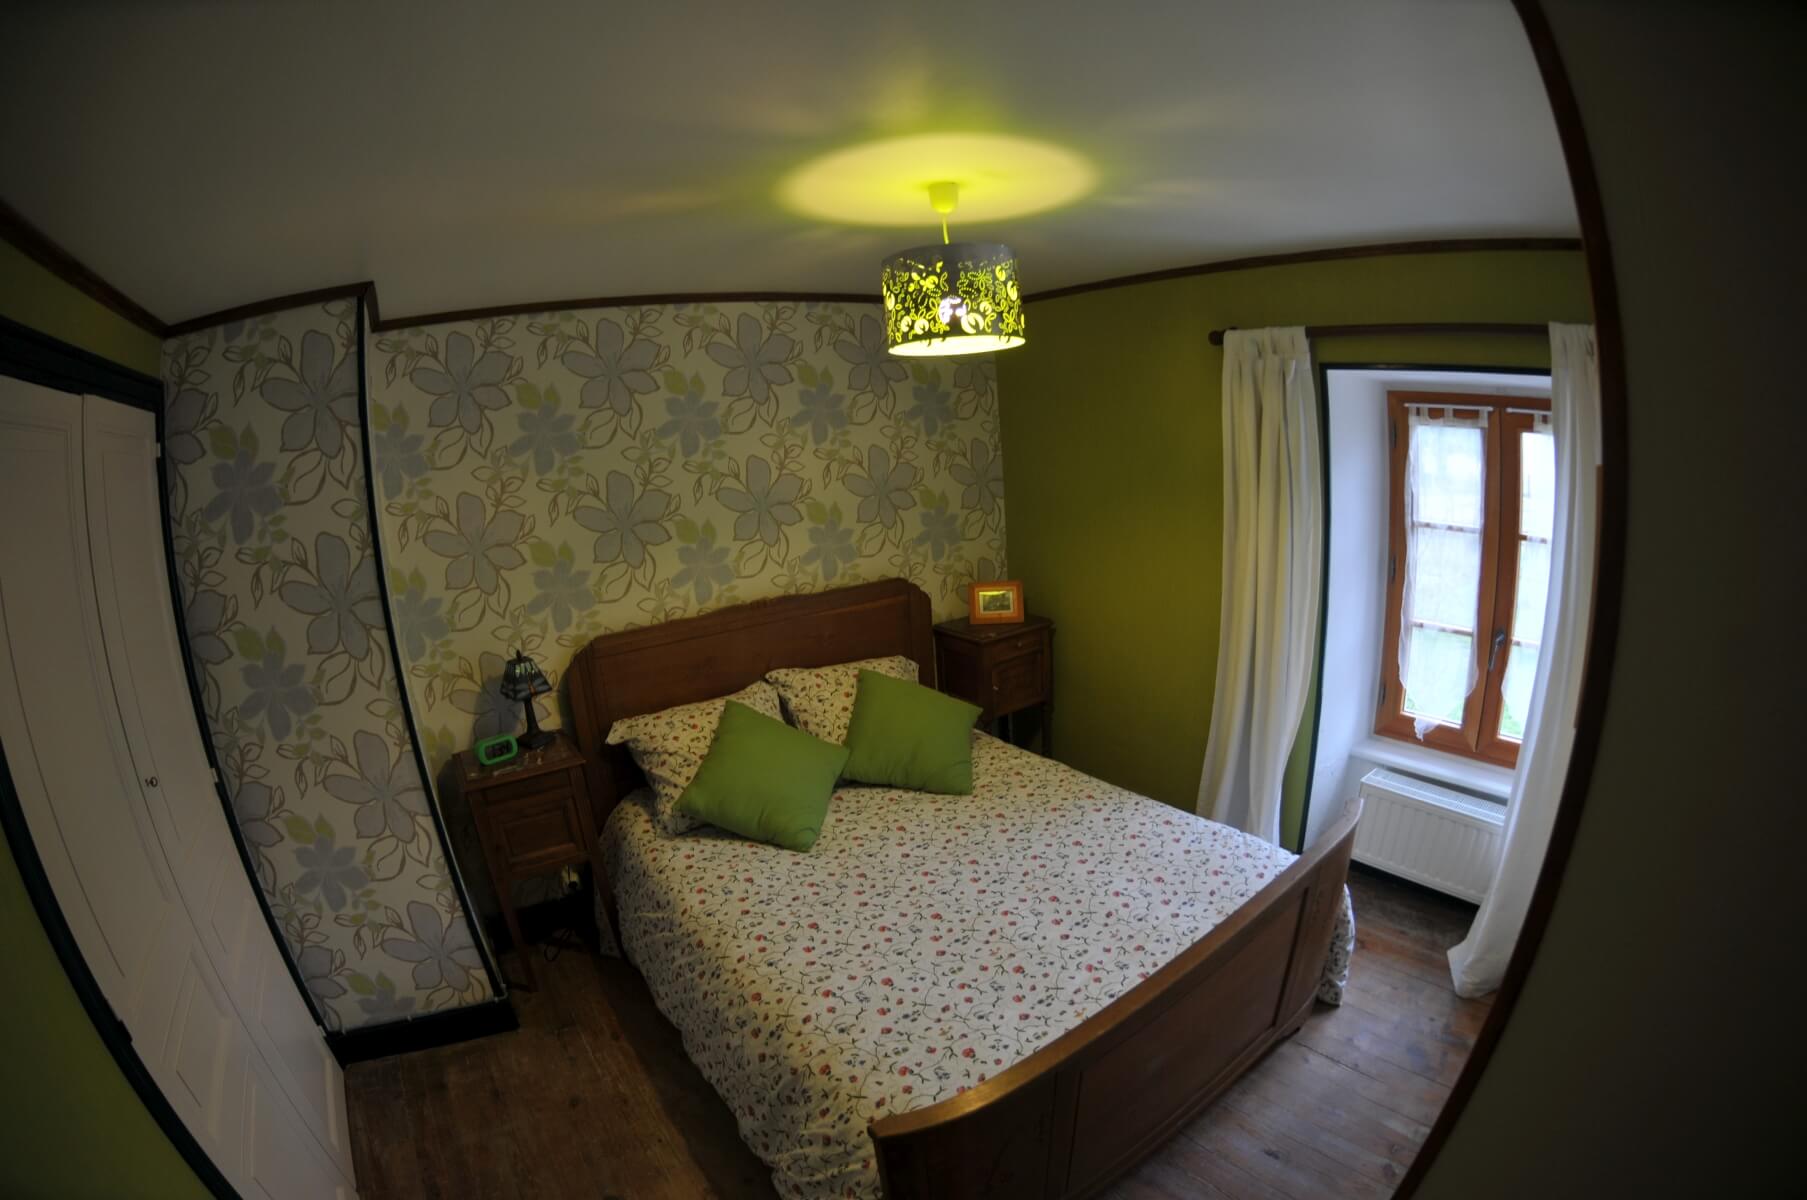 Double bed in the Caucase room